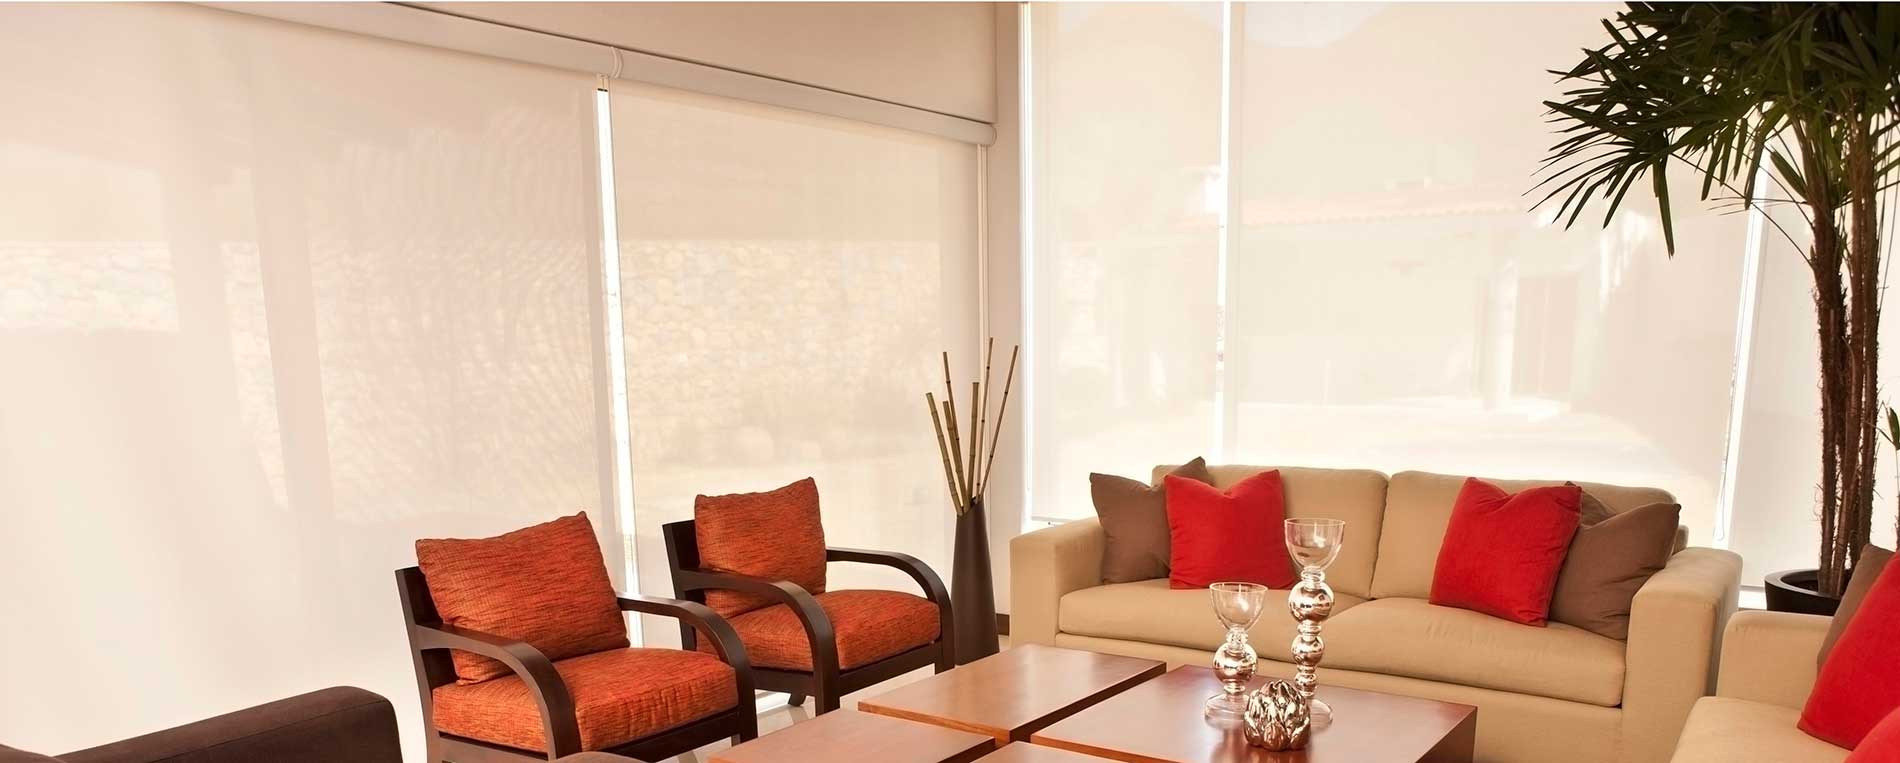 Simple Roller Shades For North Tustin Room